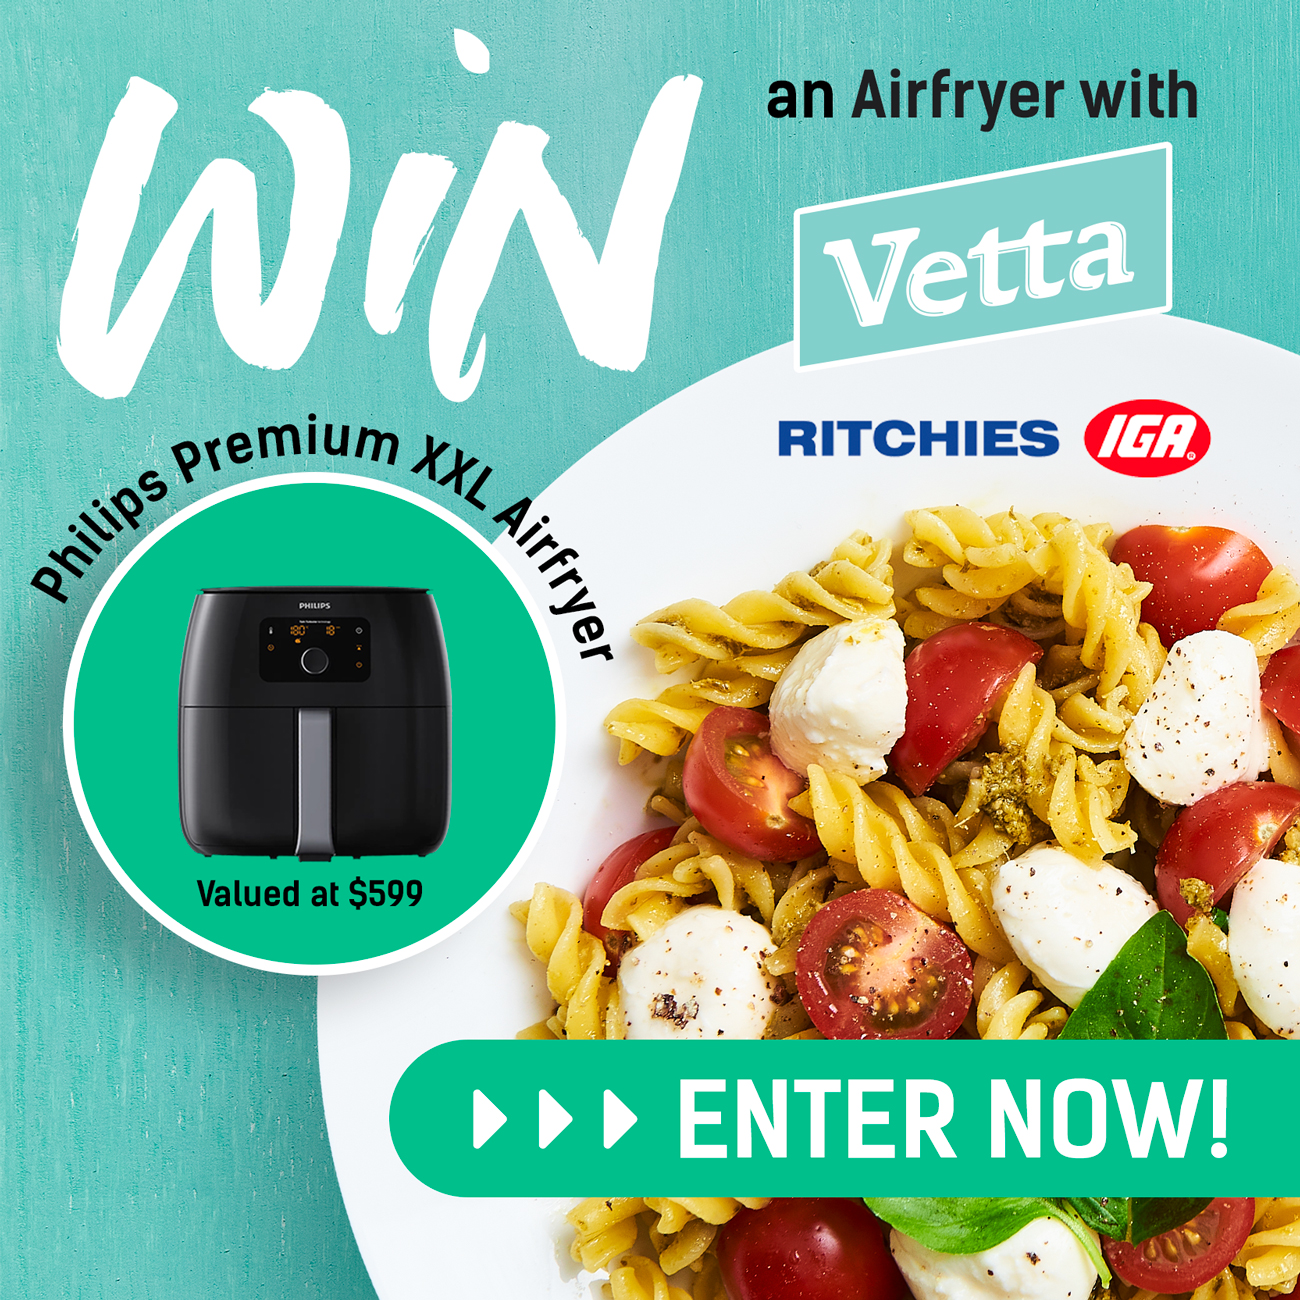 WIN an Airfryer valued at $599 with Vetta at Ritchies!